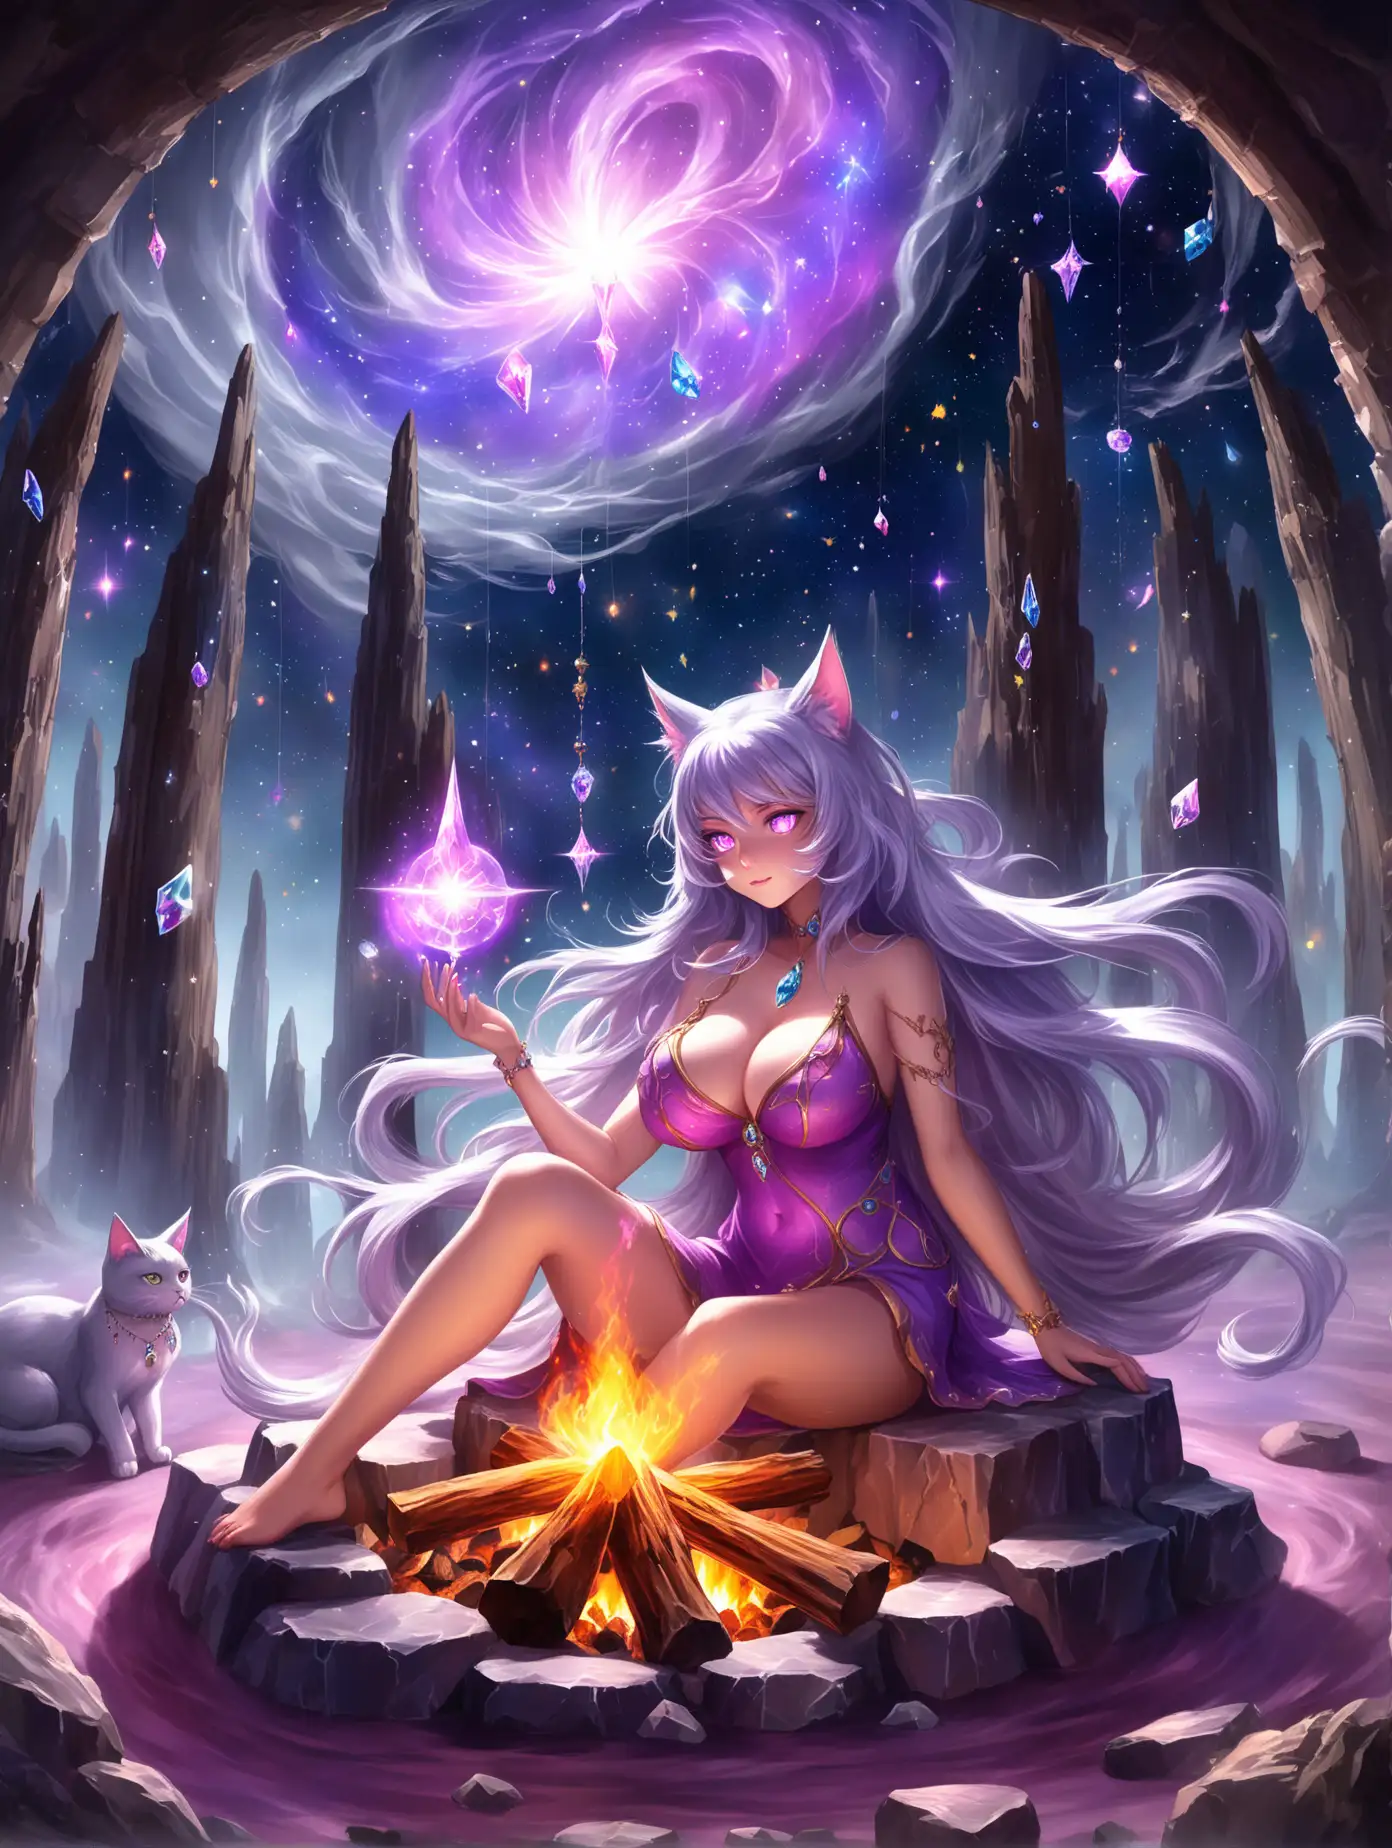 Mystical Catgirl by the Campfire Silvery Hair Nebula Smoke and Cosmic Melodies